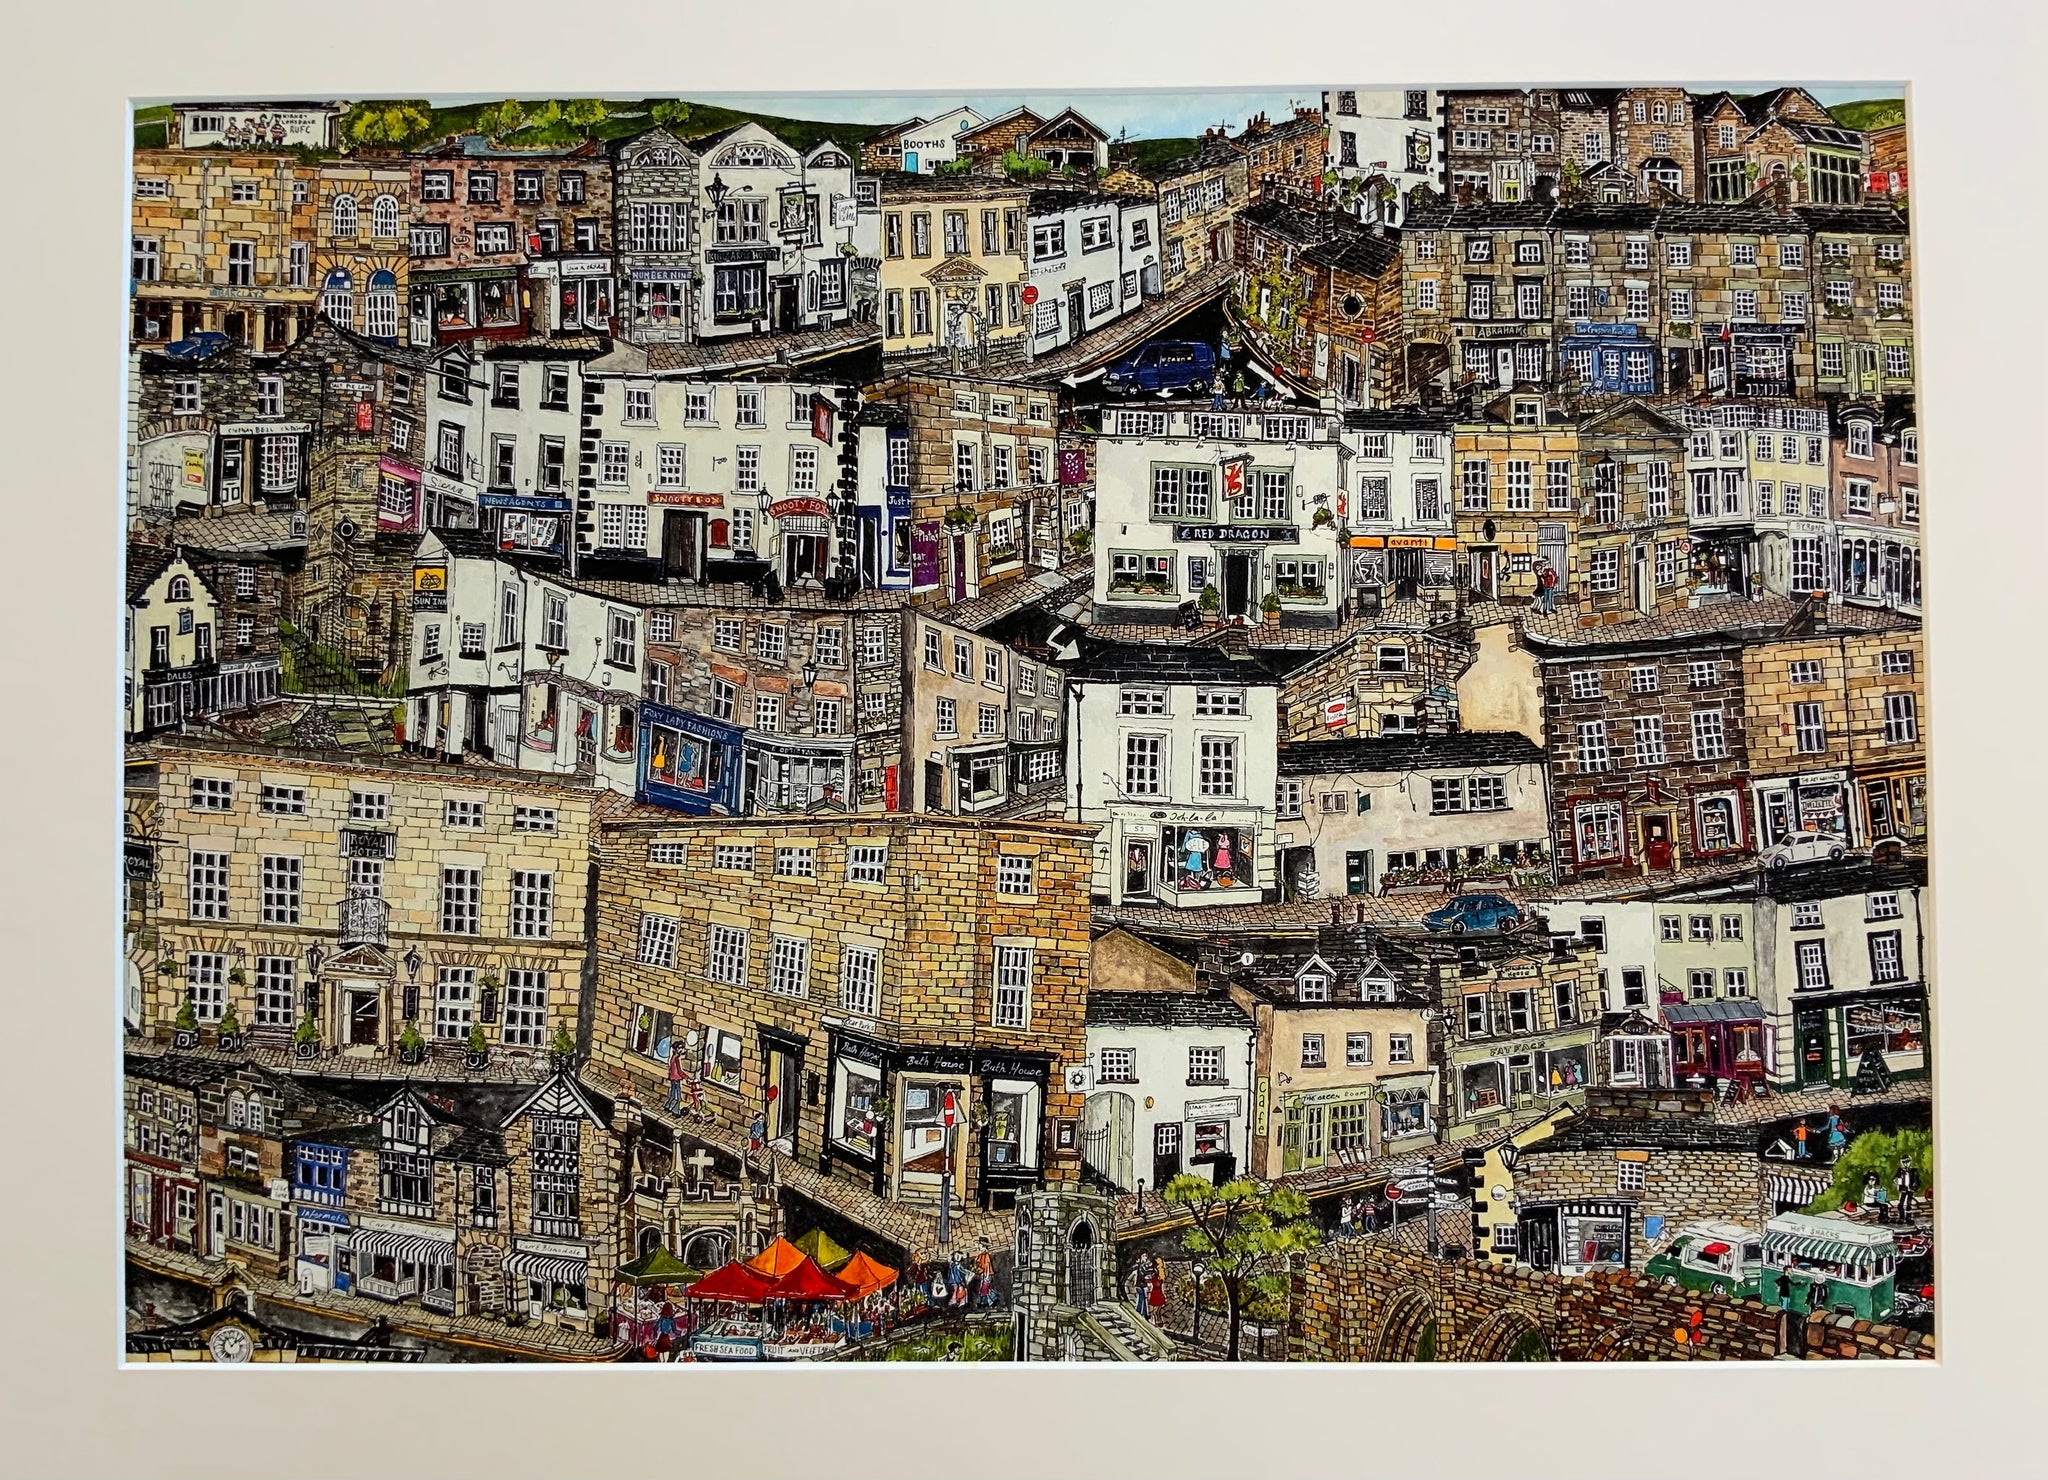 Kirkby Lonsdale - Townscape A2 420mm x 595mm. Printed on 300g acid free paper and dispatched in a sturdy tube by tracked delivery.